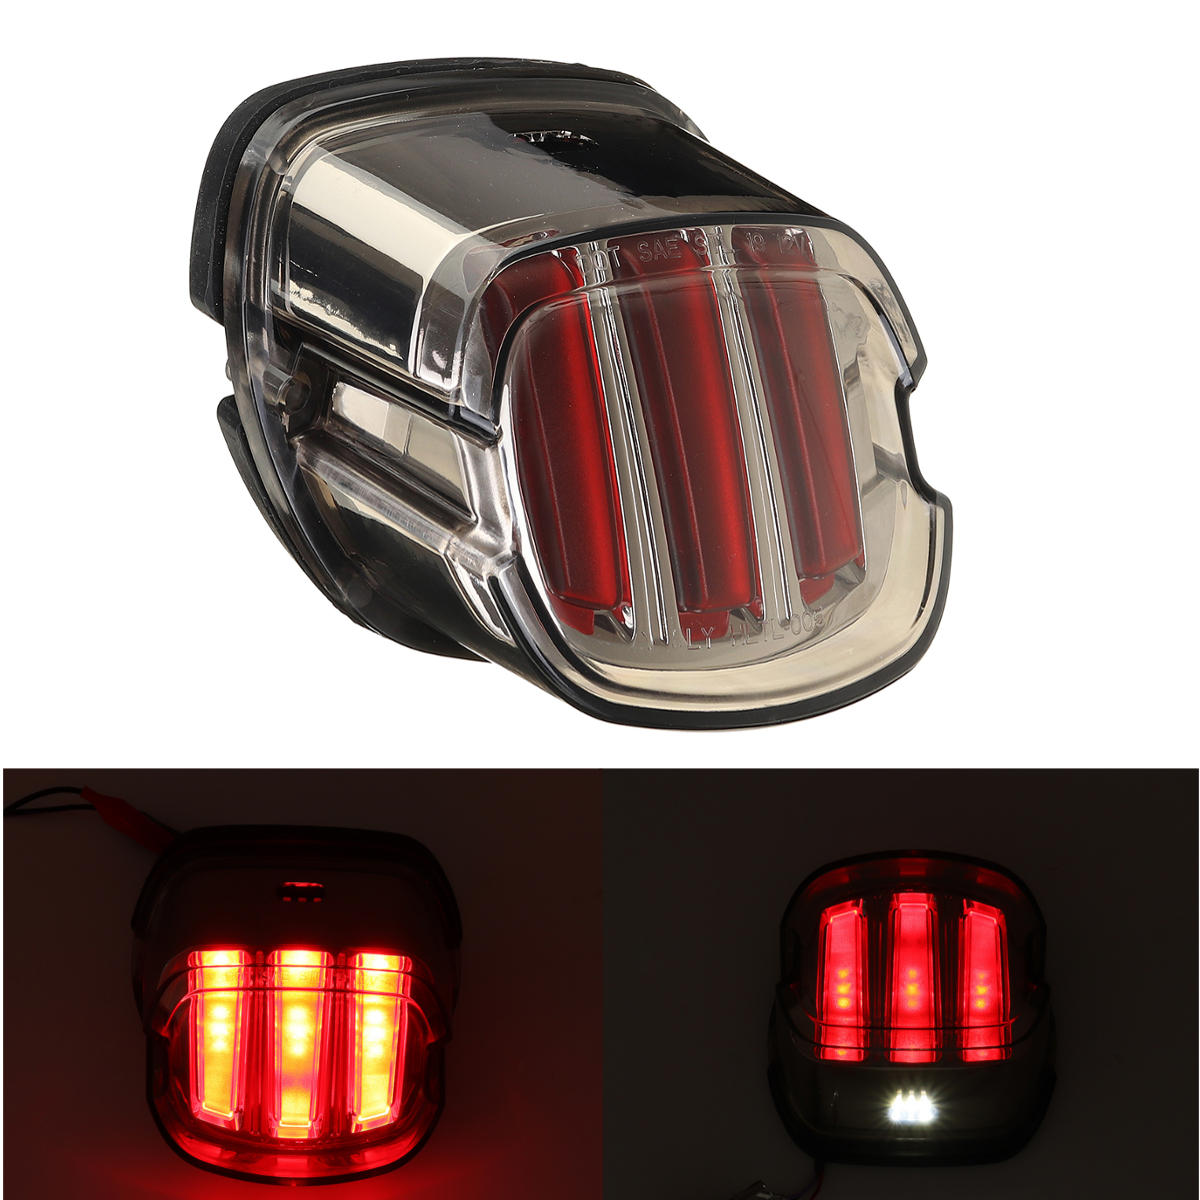 Motorcycle Bike Taillight Rear Brake Tail Stop Red Light For Harley